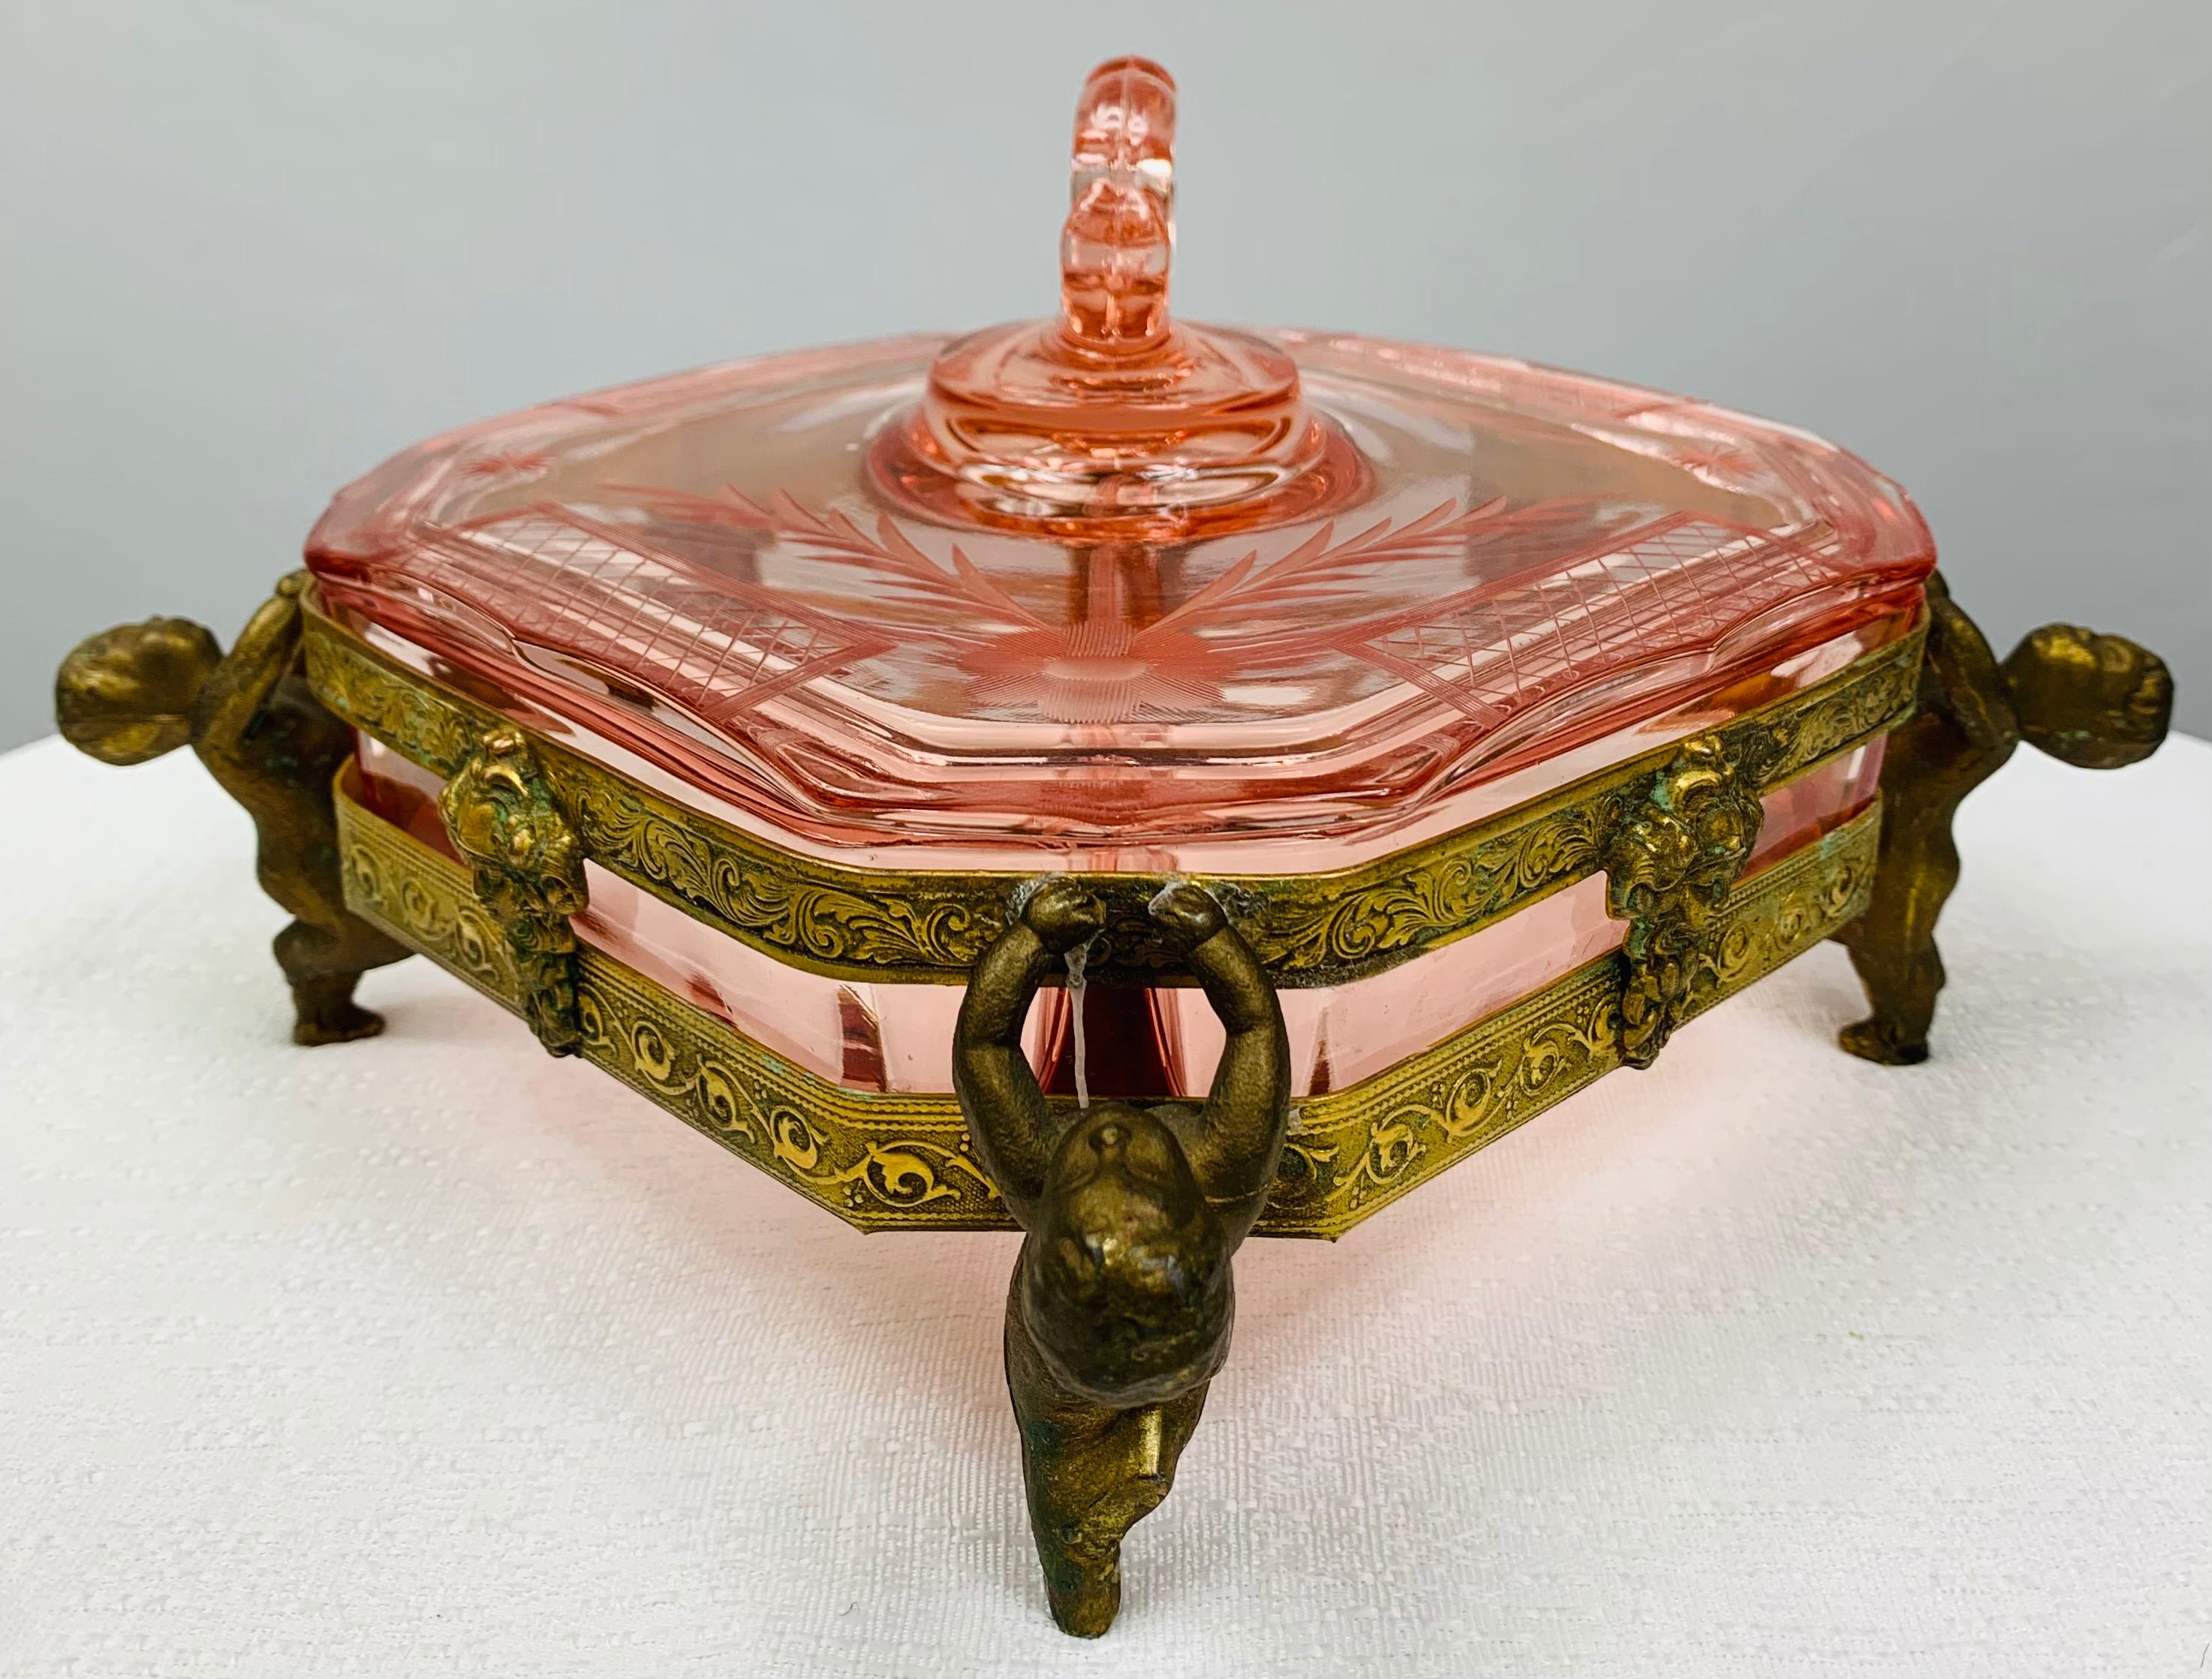 A beautiful antique 19th century French Louis XV bronze and cut glass jewelry box. The bronze inlay features four wingless putti in each corner and
a women (man) face sculpted in the middle of each side. The glass of square shaped box is nicely